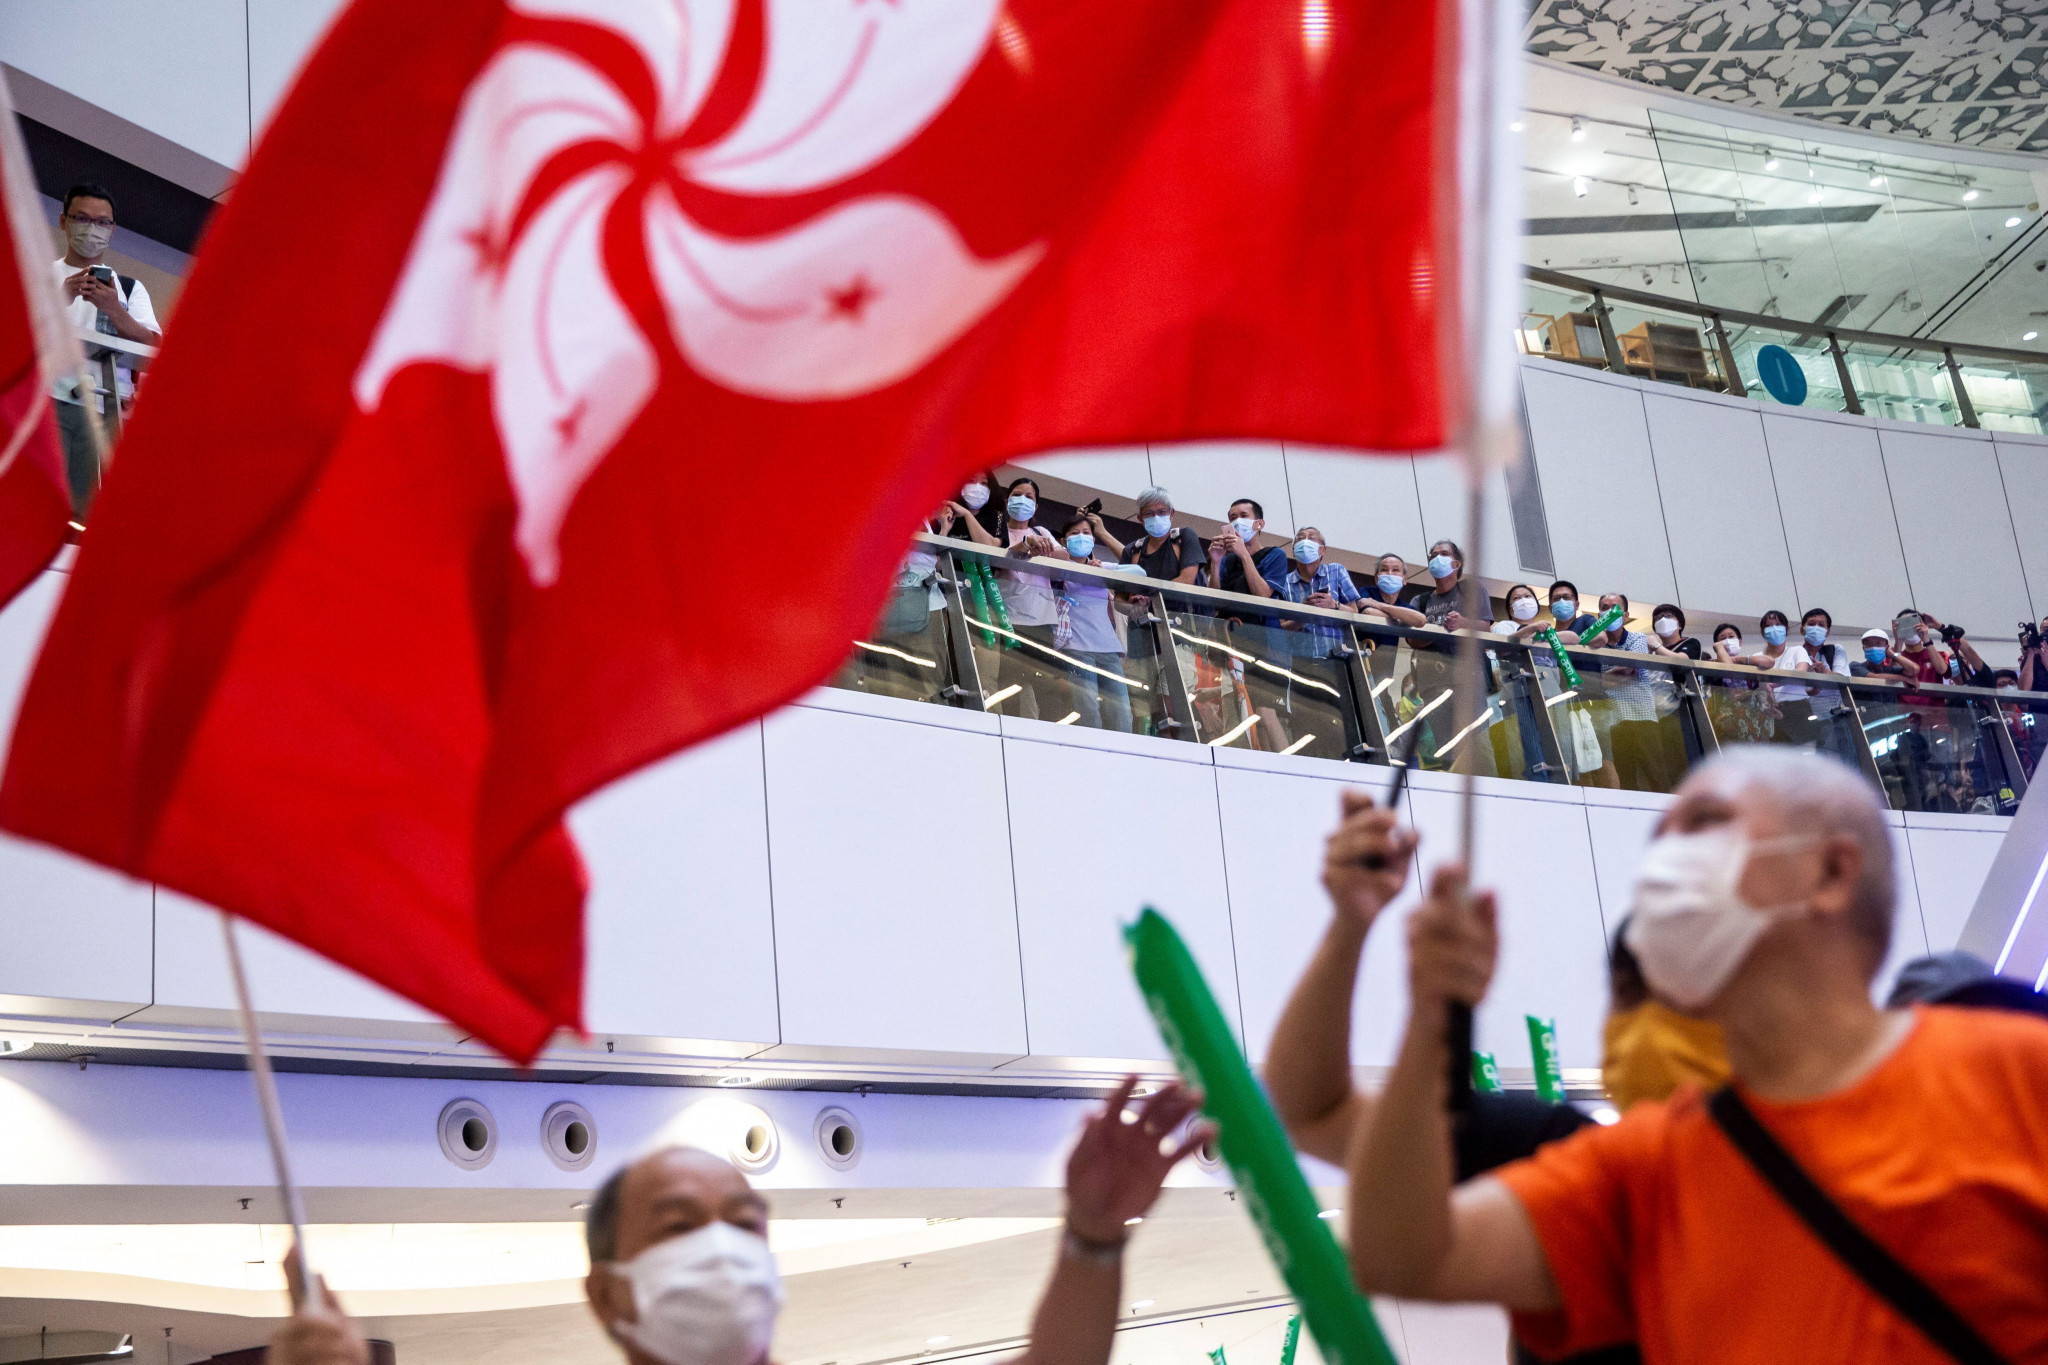 The Hong Kong Government has supported the Sports Federation & Olympic Committee of Hong Kong, China's decision to issue the Hong Kong Ice Hockey Association with a 